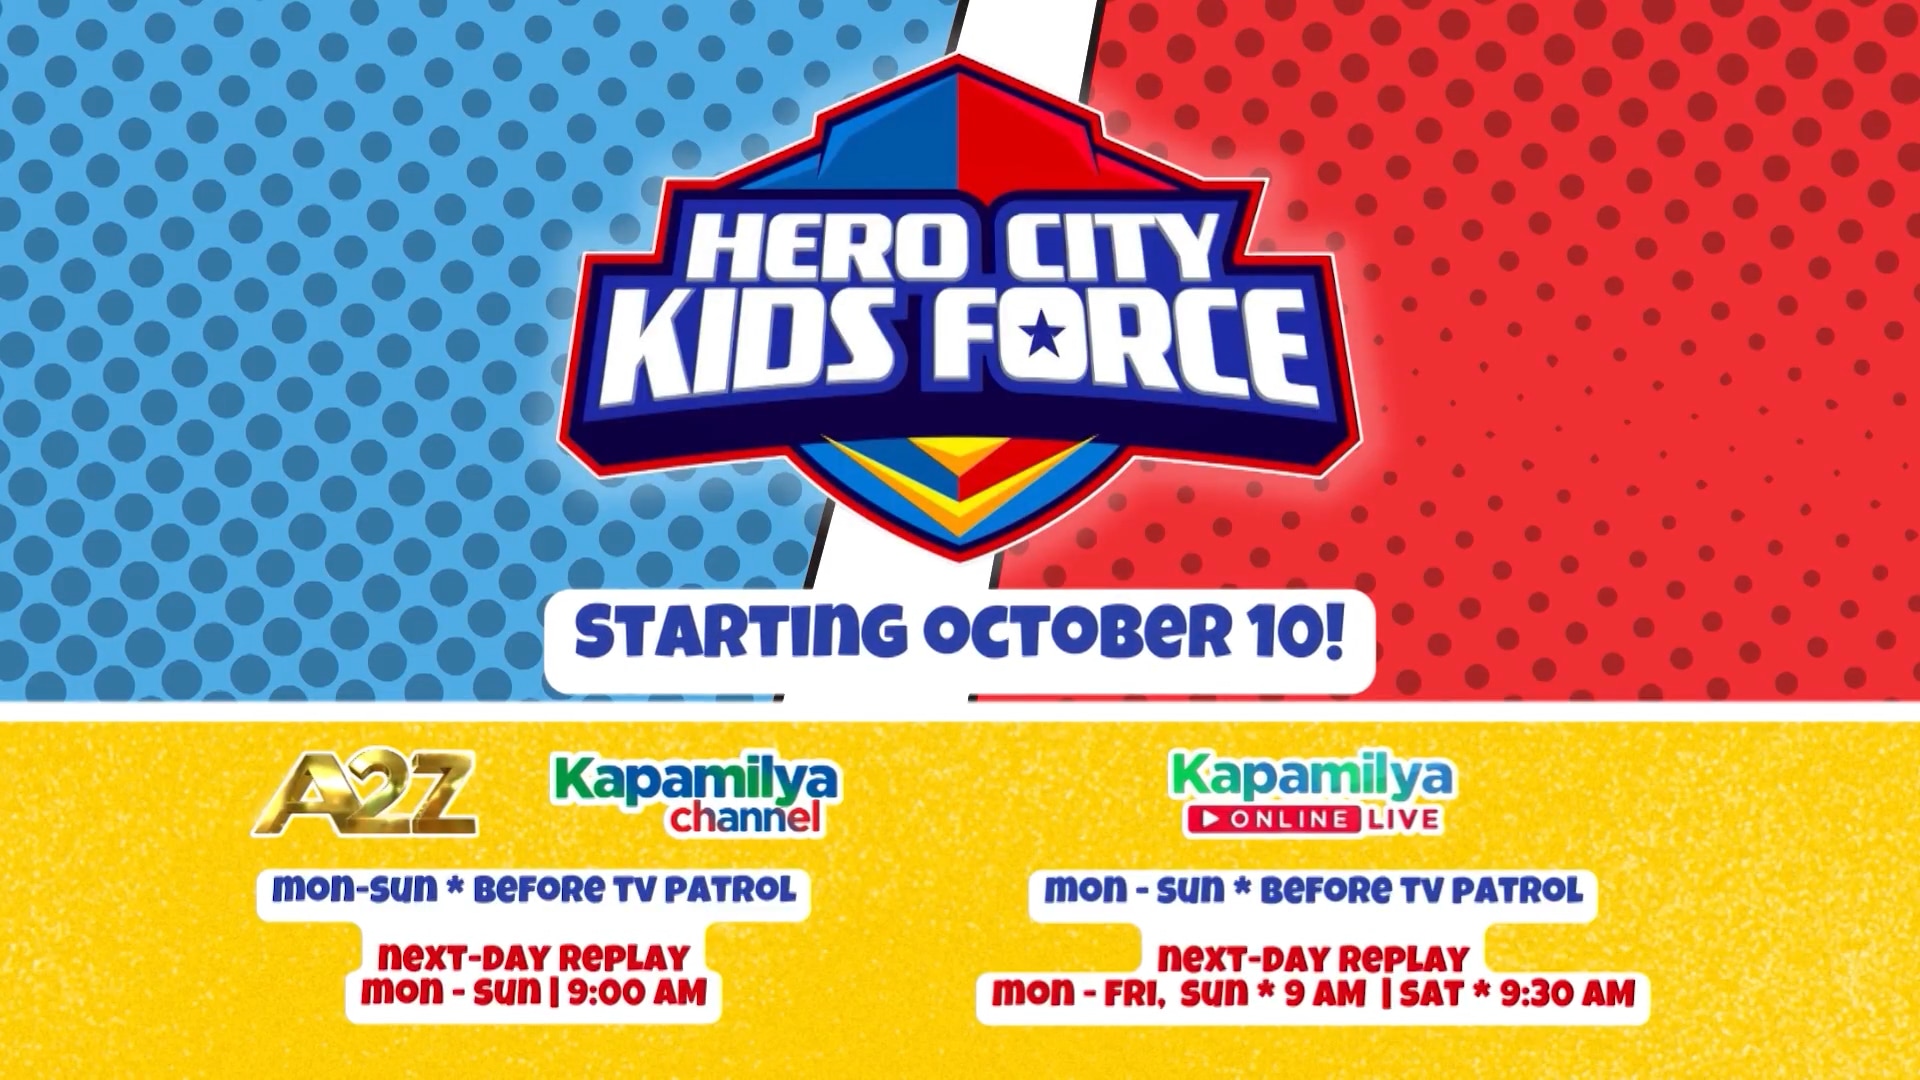 Darna, Captain Barbell, and Lastikman bring fun adventures daily on 'Hero City Kids Force'